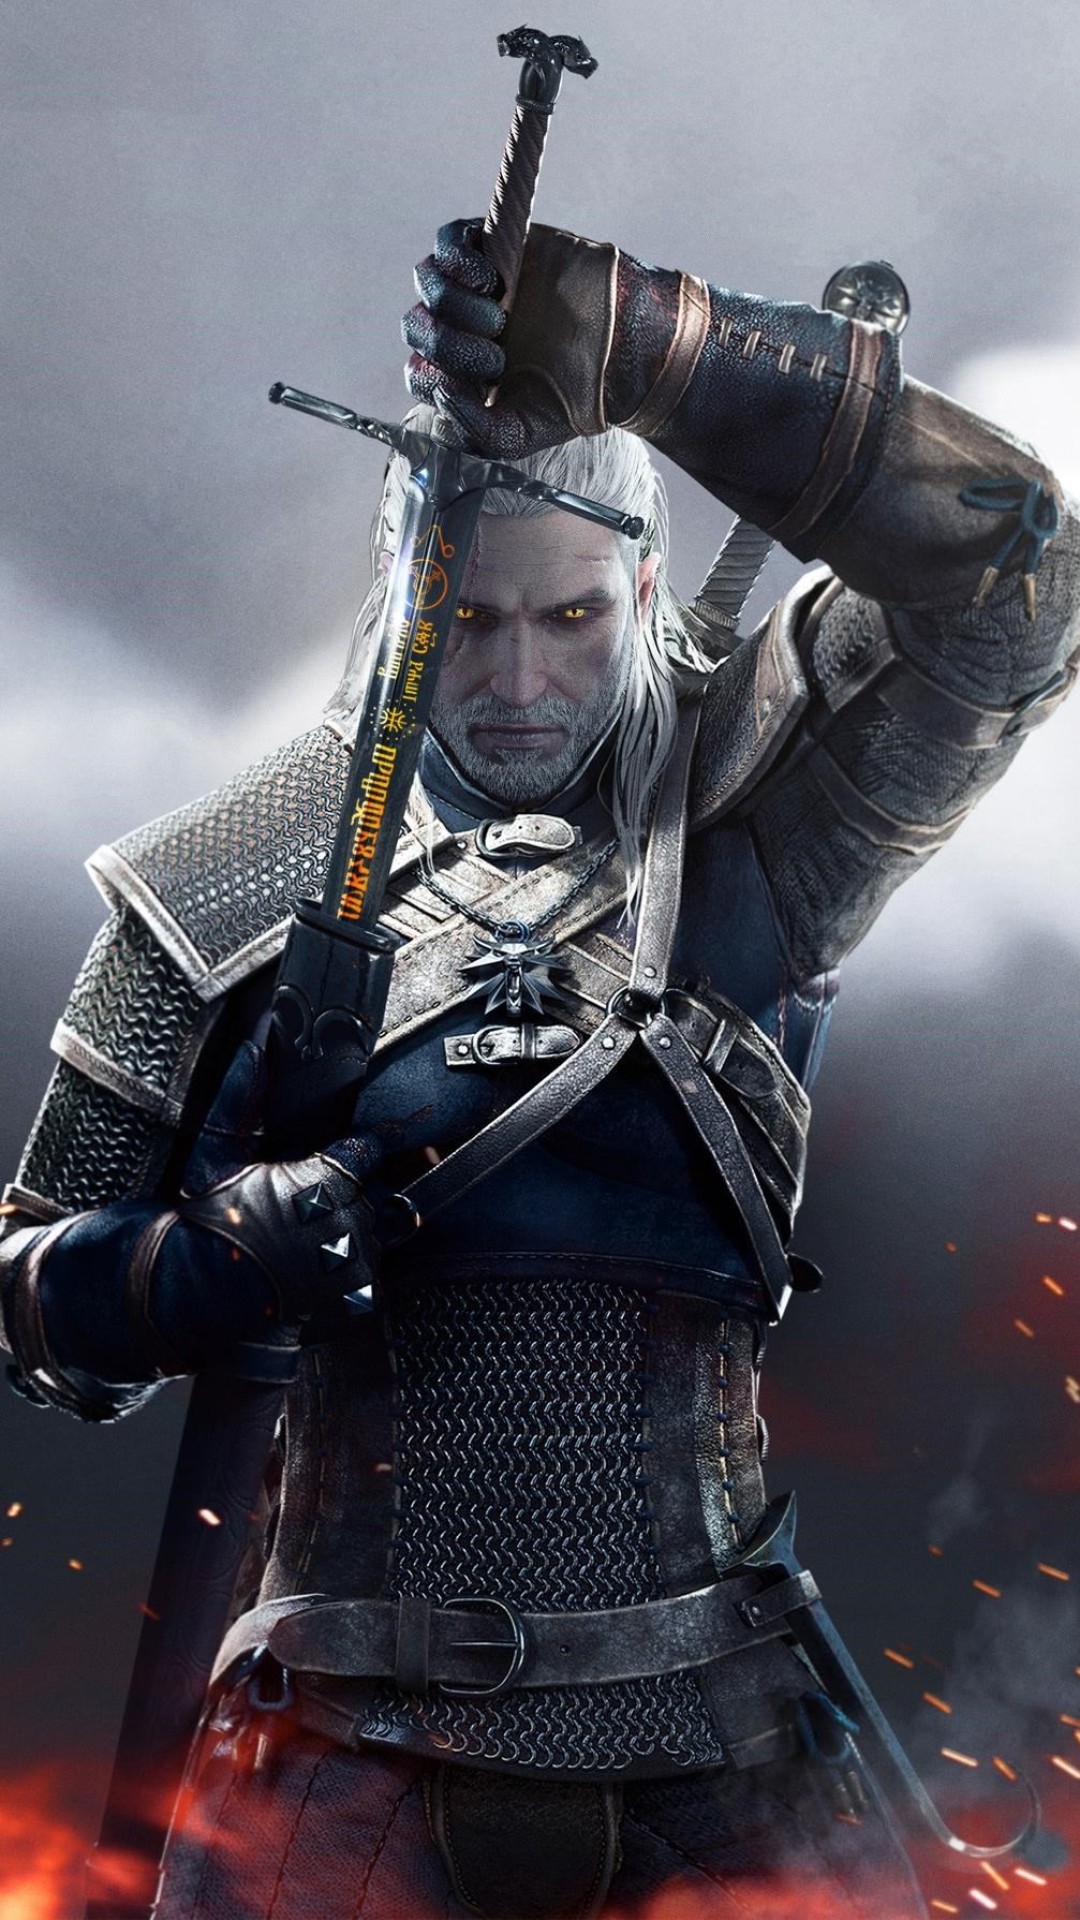 the witcher 3 iphone wallpaper,movie,armour,games,knight,pc game